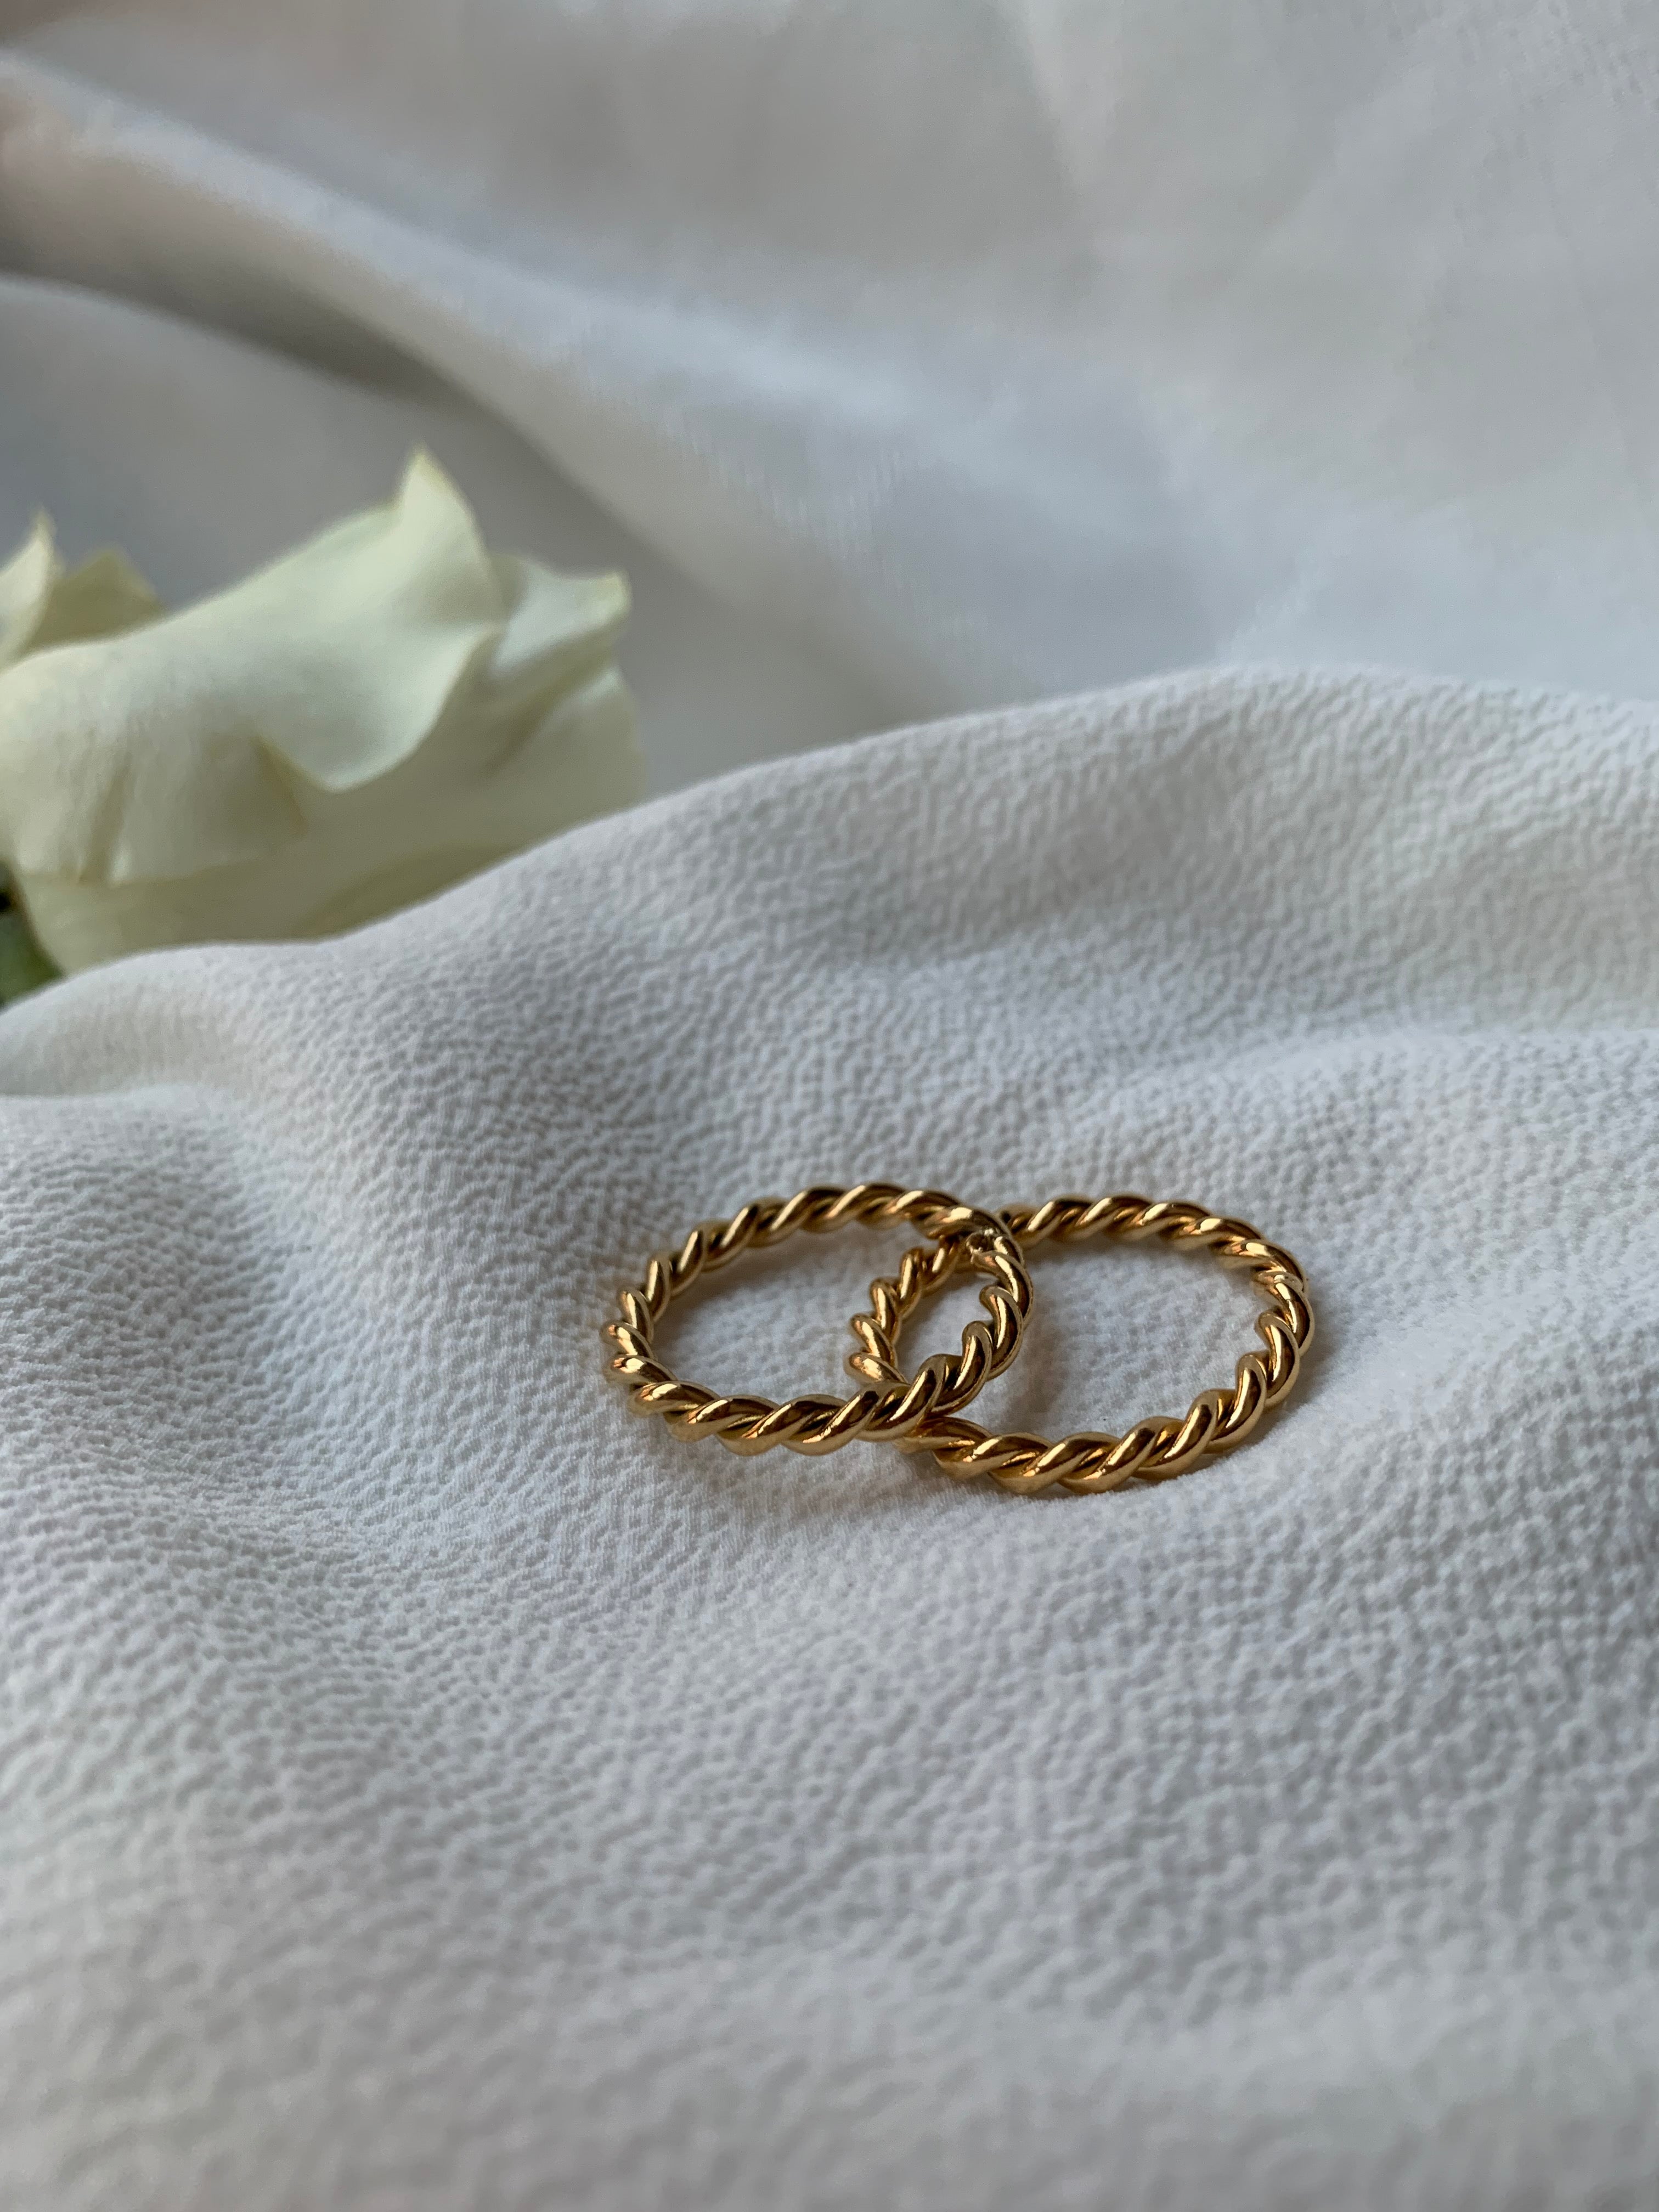 twist and shout in the small twisted alexa ring. she's cute she's stackable, and she wants to be SEEN! 14K Gold Plated Hypoallergenic Tarnish Resistant Water Resistant Available in sizes 5,6,7,8 | Alexa Ring | Handmade Jewelry EasyClubCo